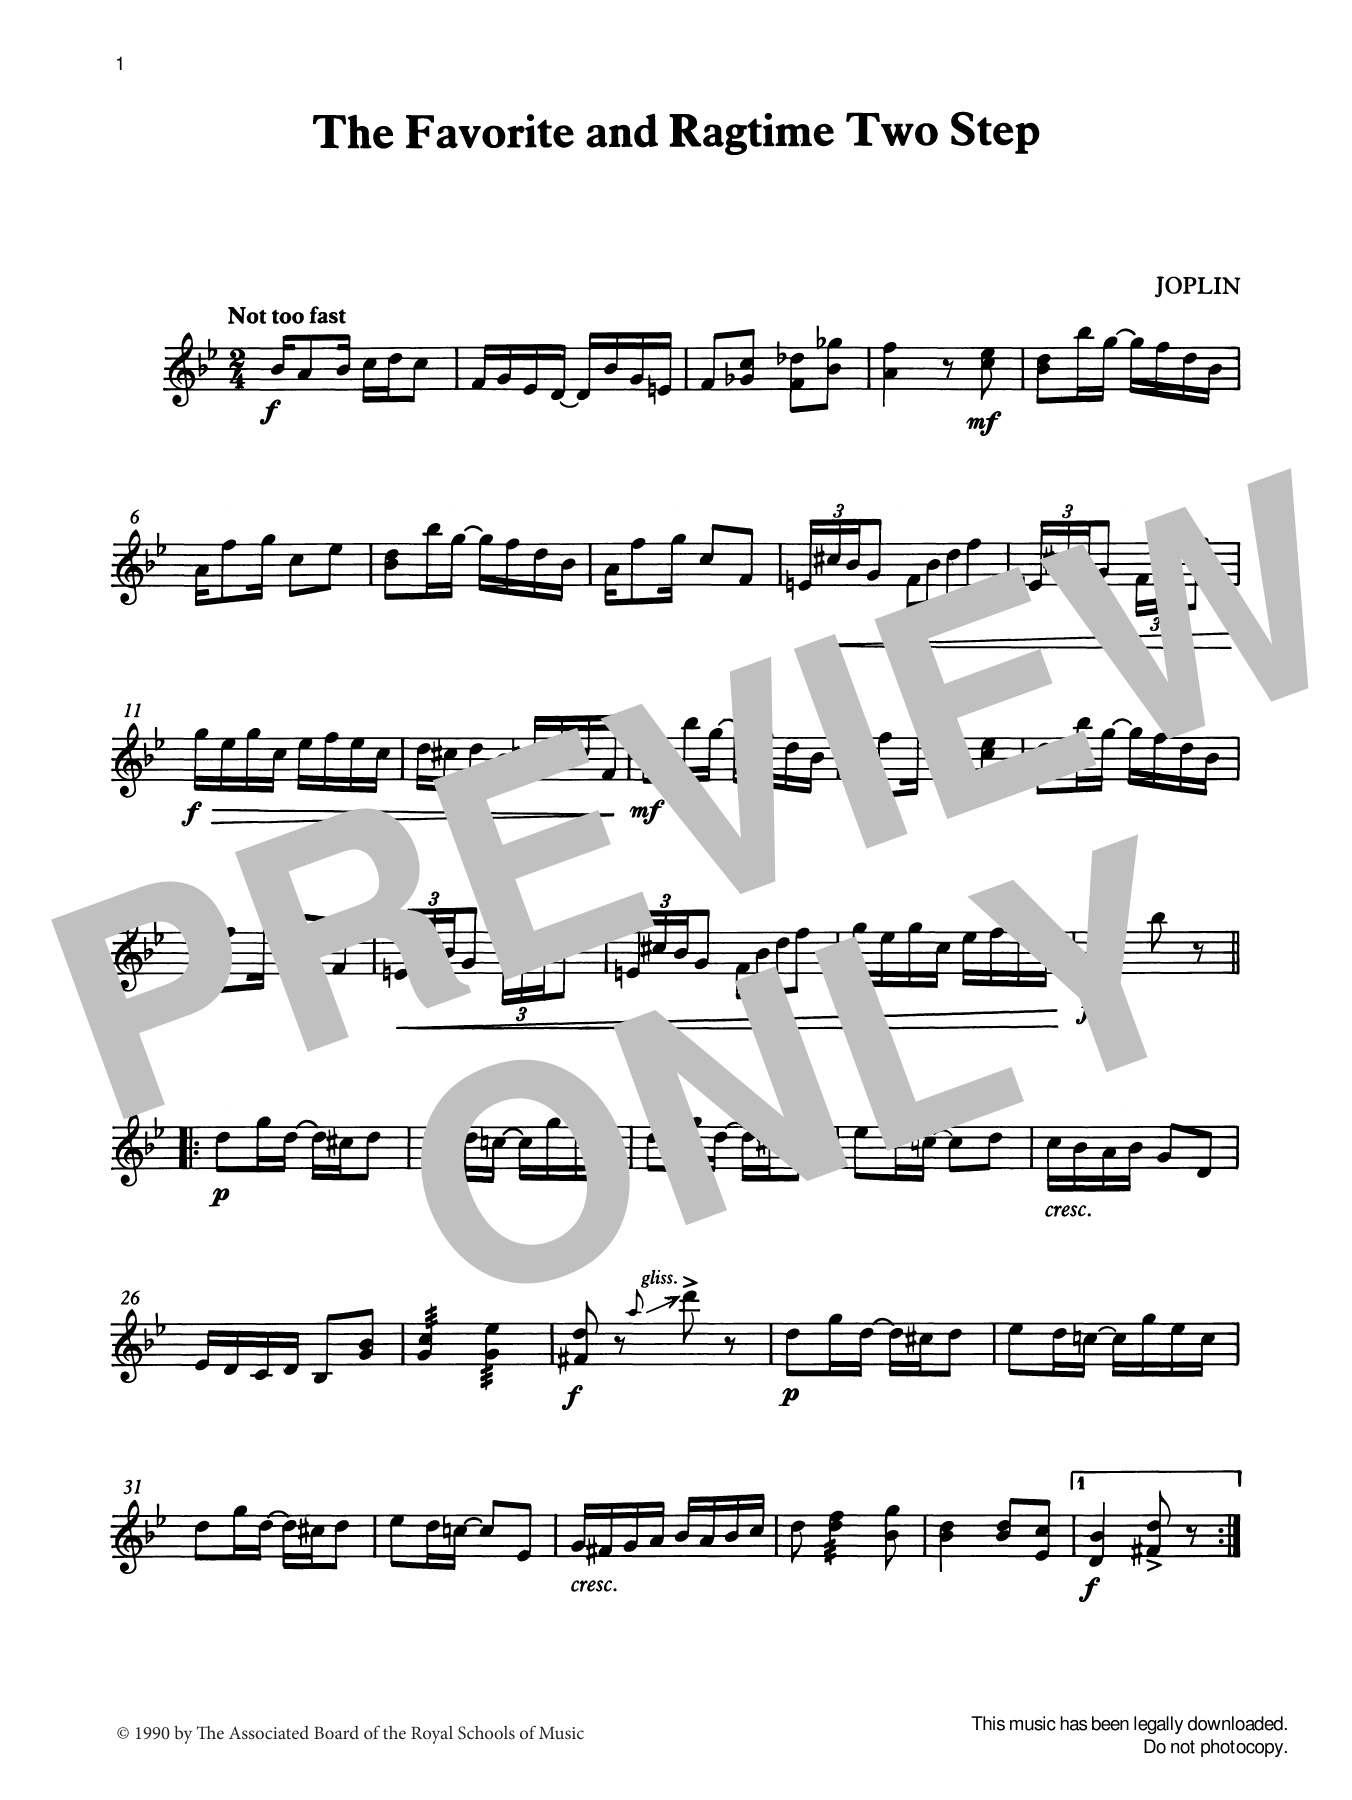 Download Scott Joplin The Favorite and Ragtime Two Step from Sheet Music